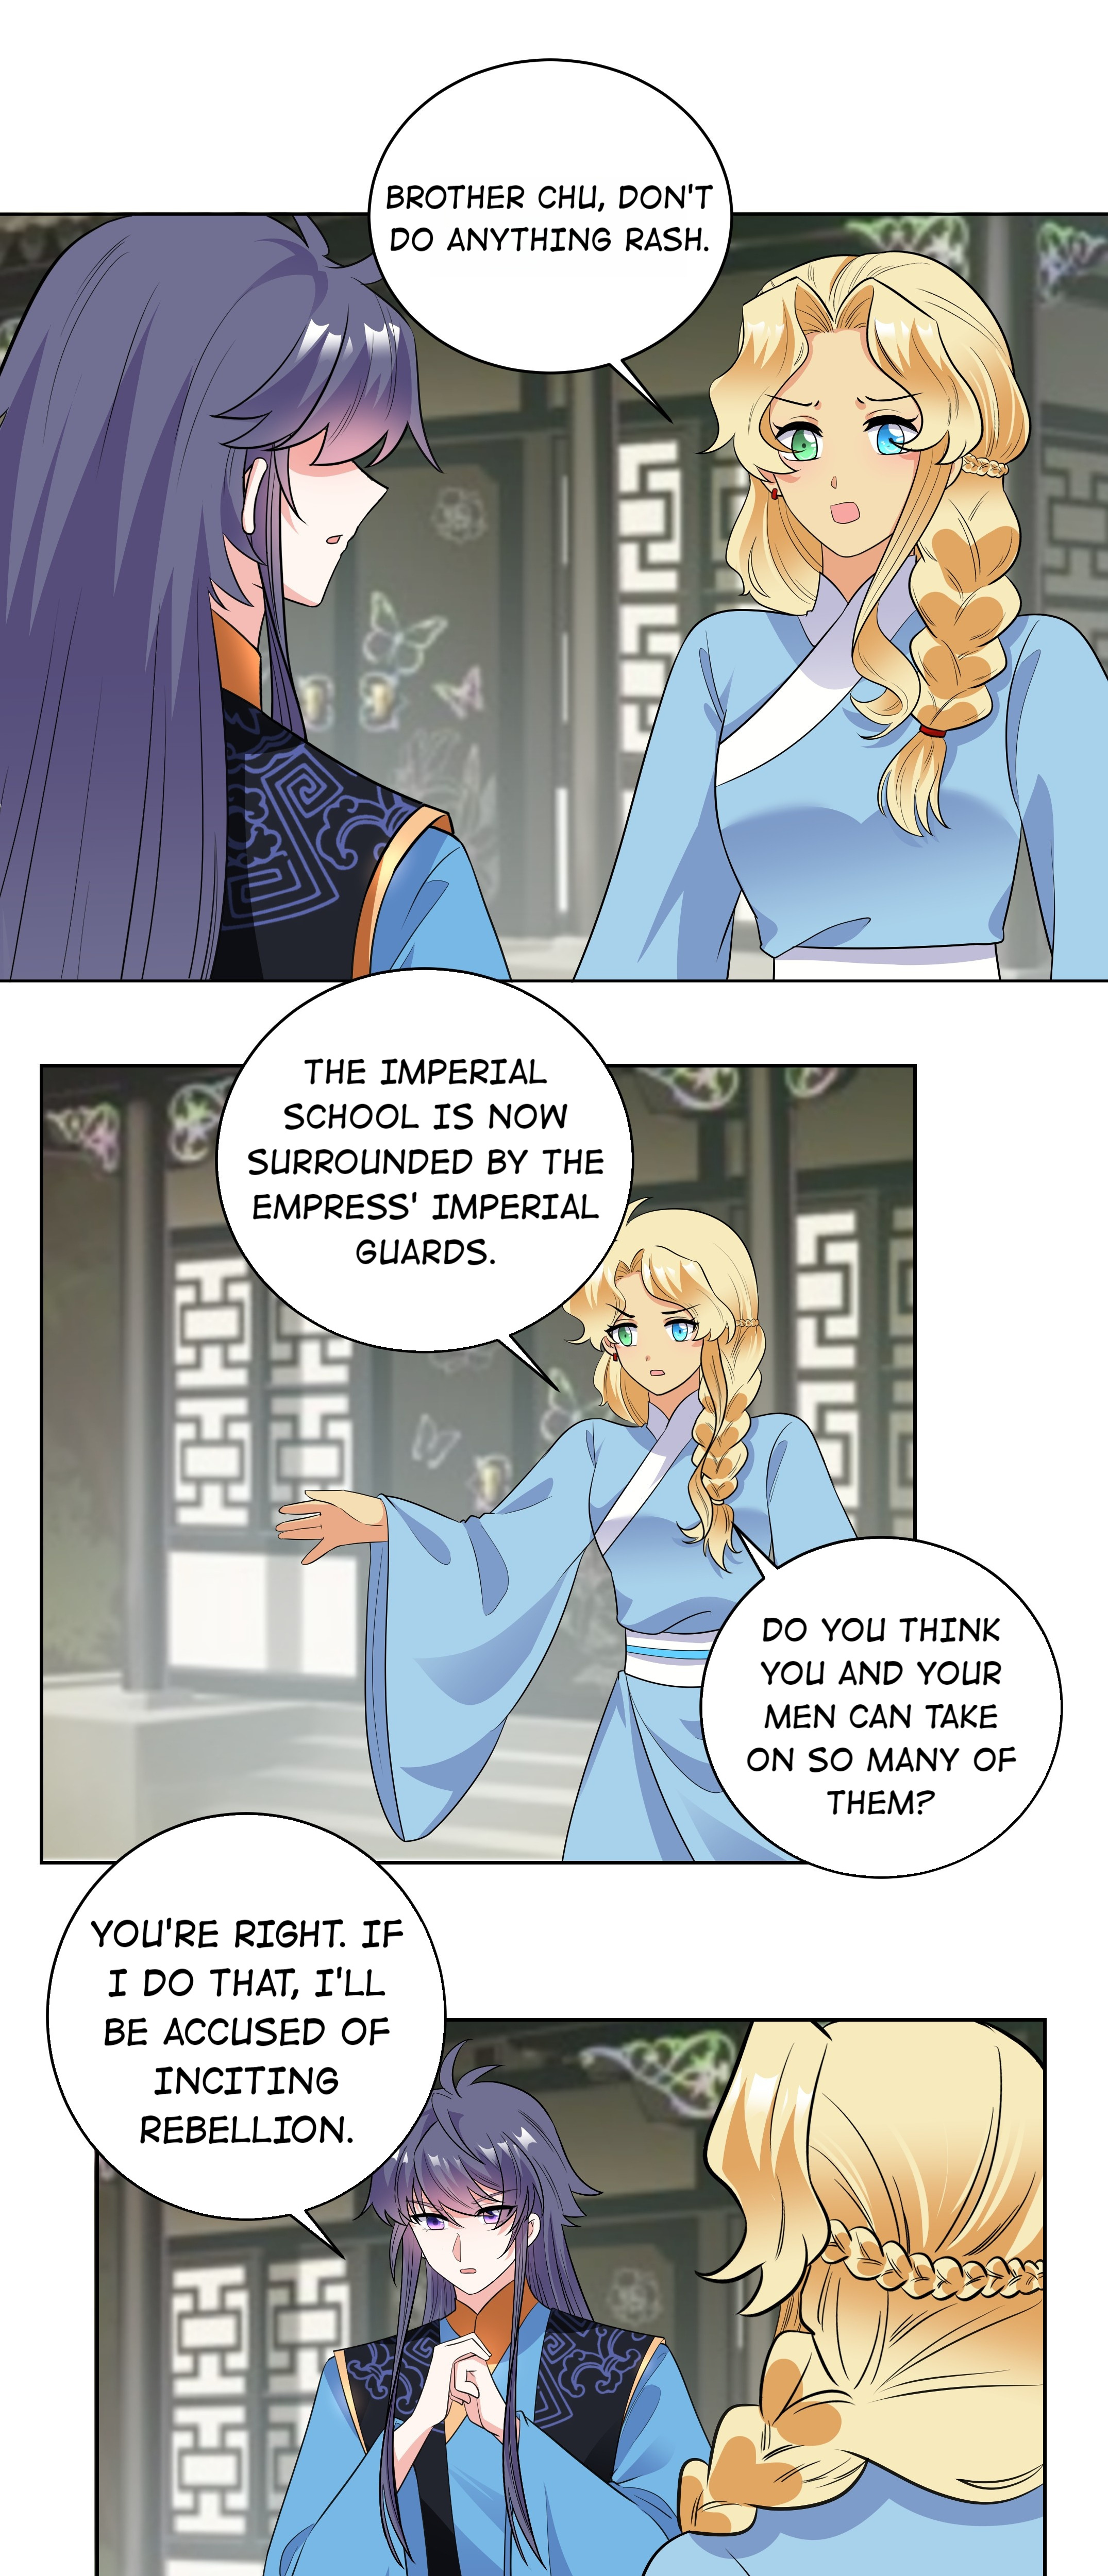 The Prince Consort Is Passing - Page 2